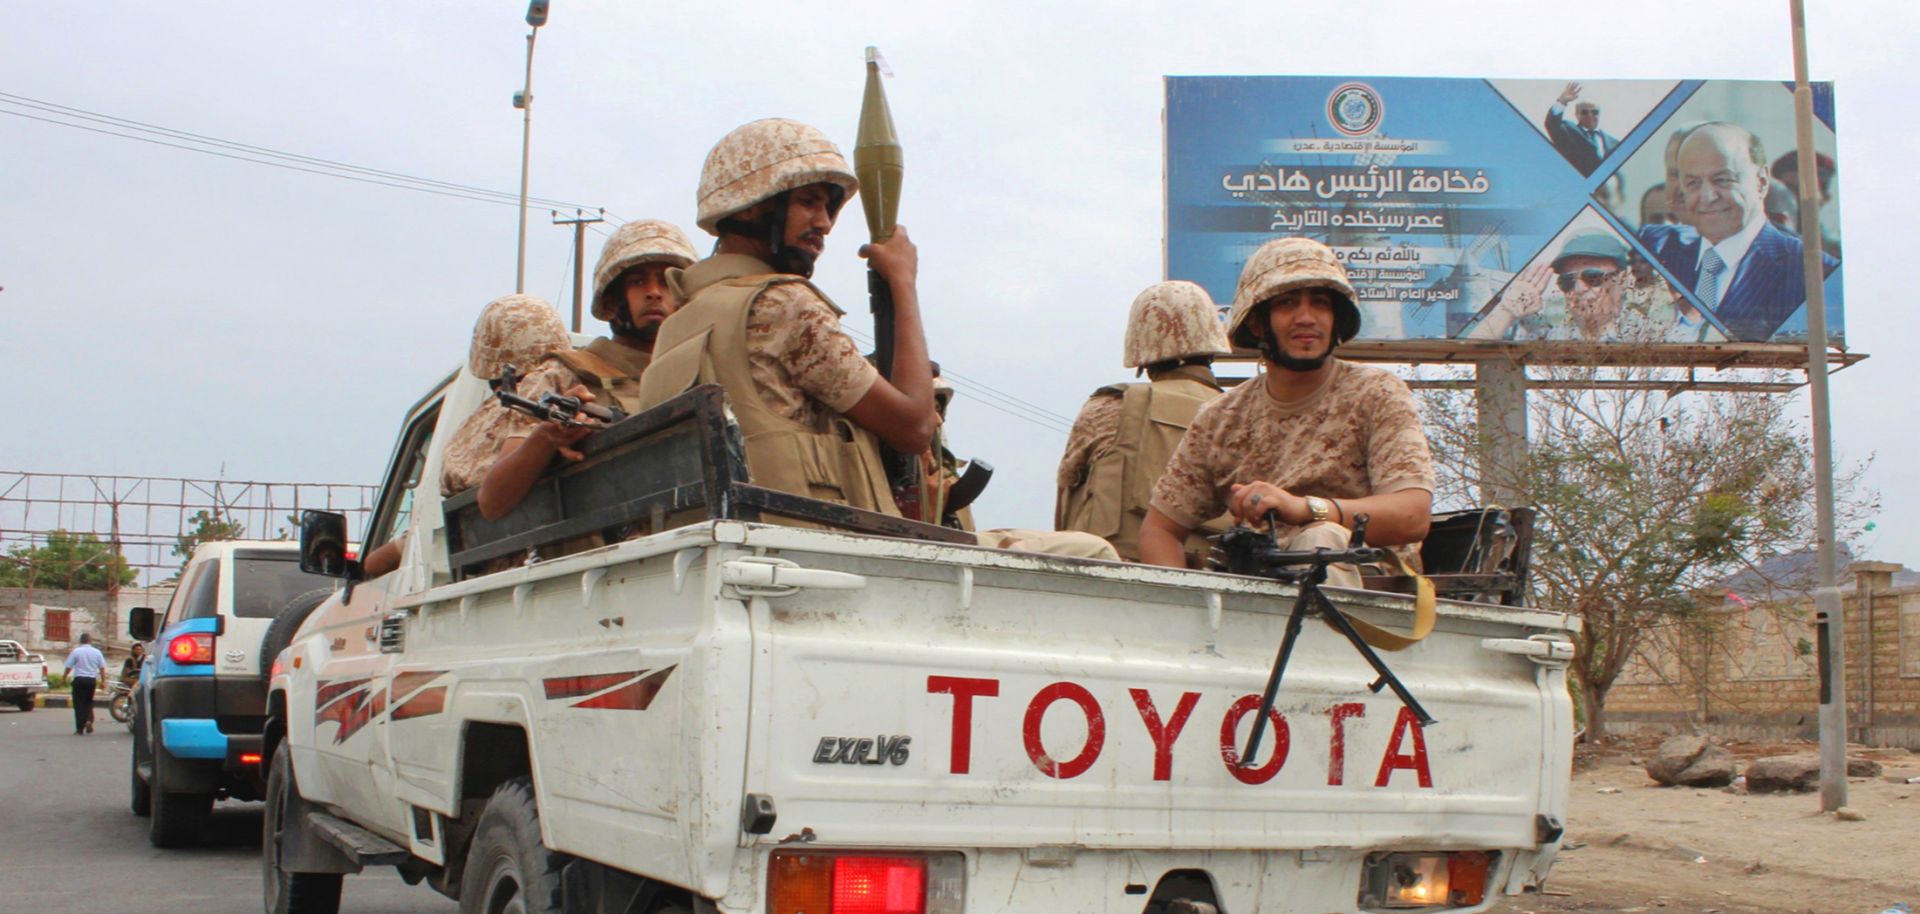 This photo shows Yemeni separatist fighters being carried in the back of a civilian pickup truck in the city of Aden.